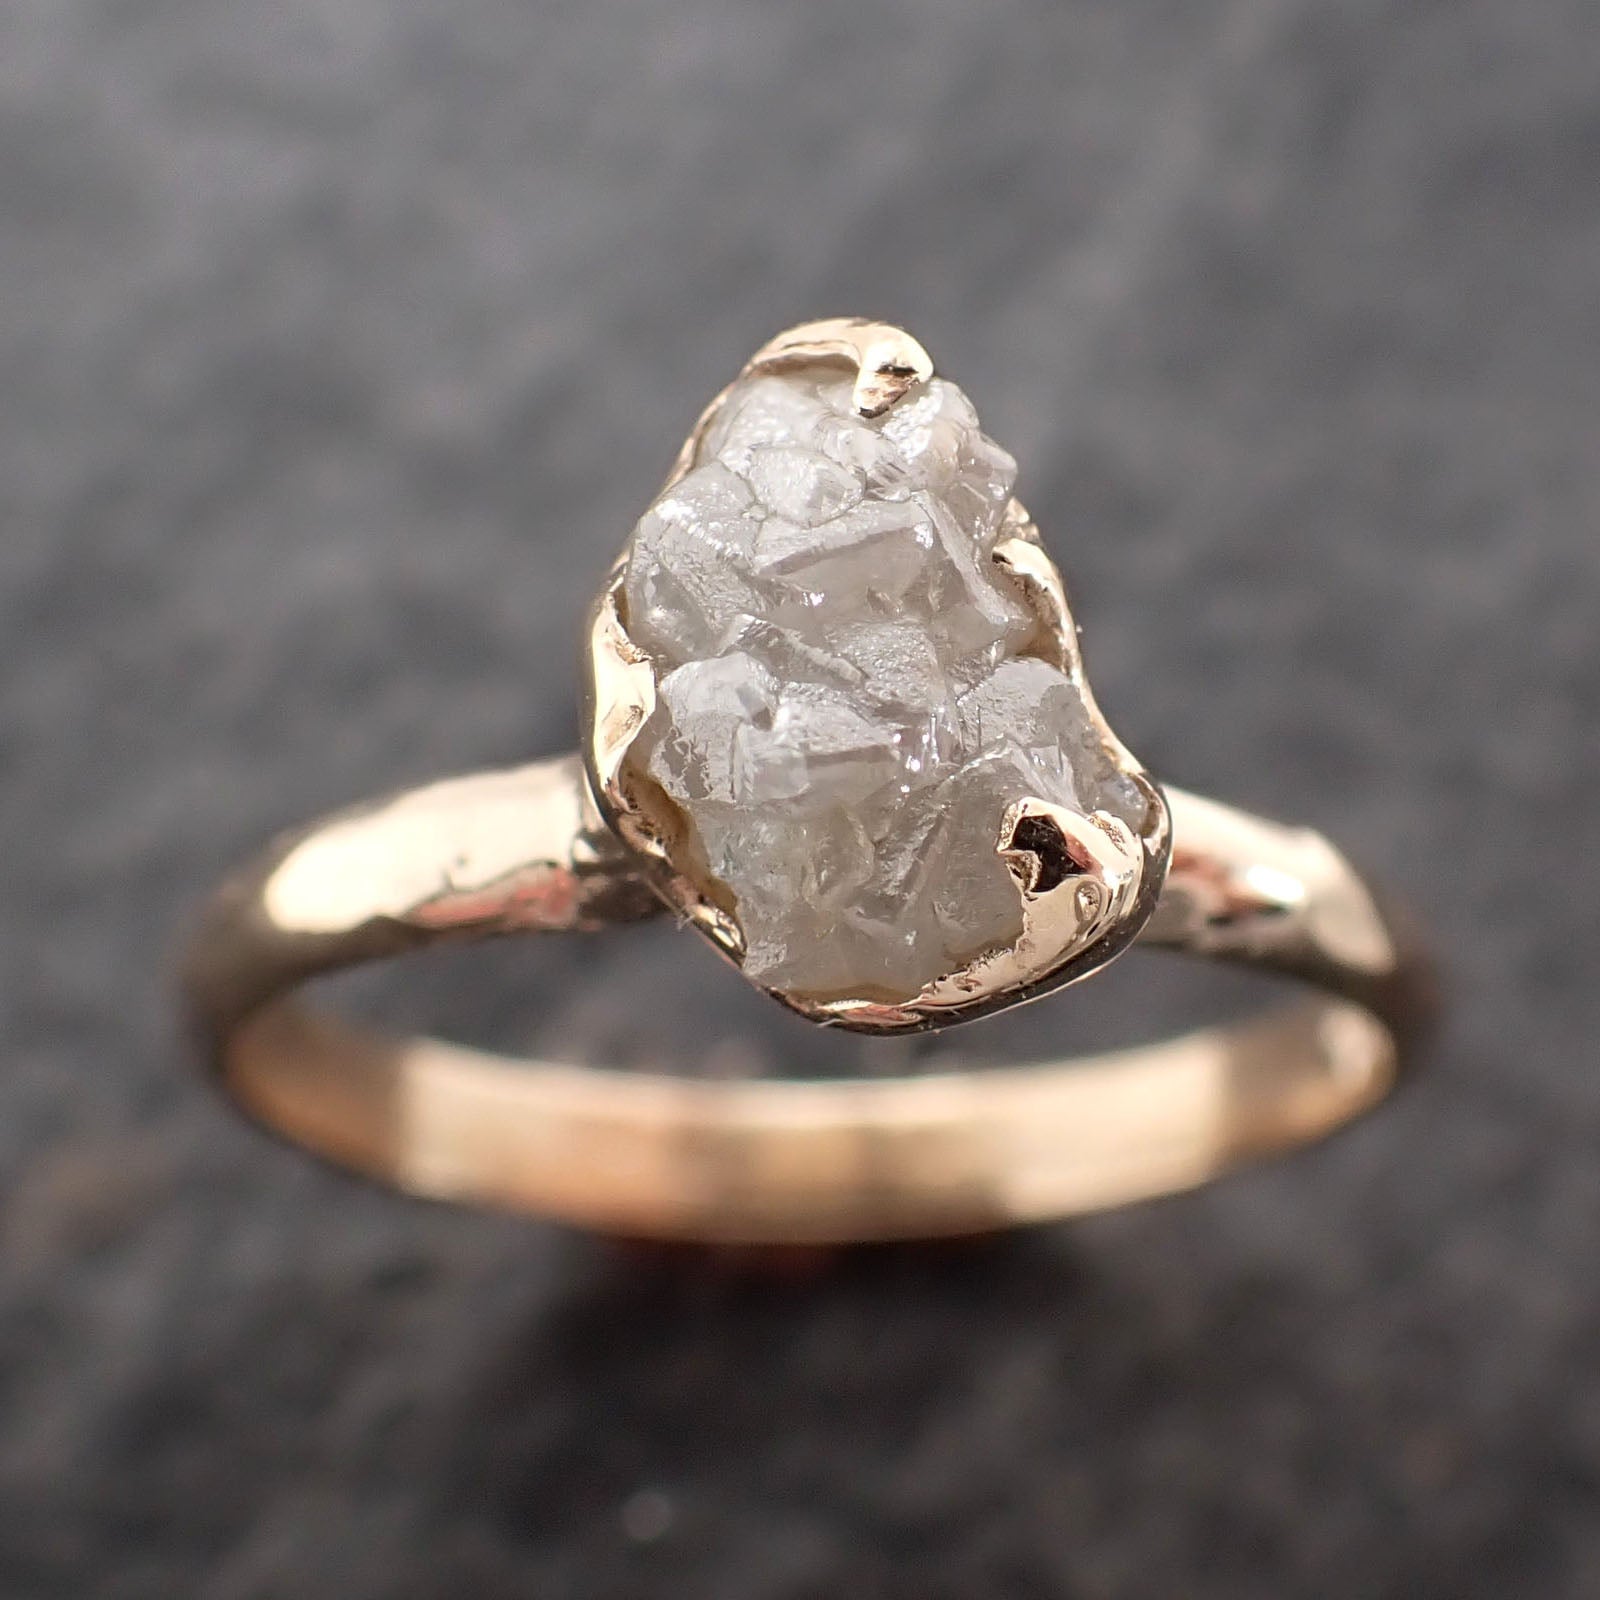 Raw Diamond Engagement Ring Rough Uncut Diamond Solitaire Recycled 14k yellow gold Conflict Free Diamond Wedding Promise 2763